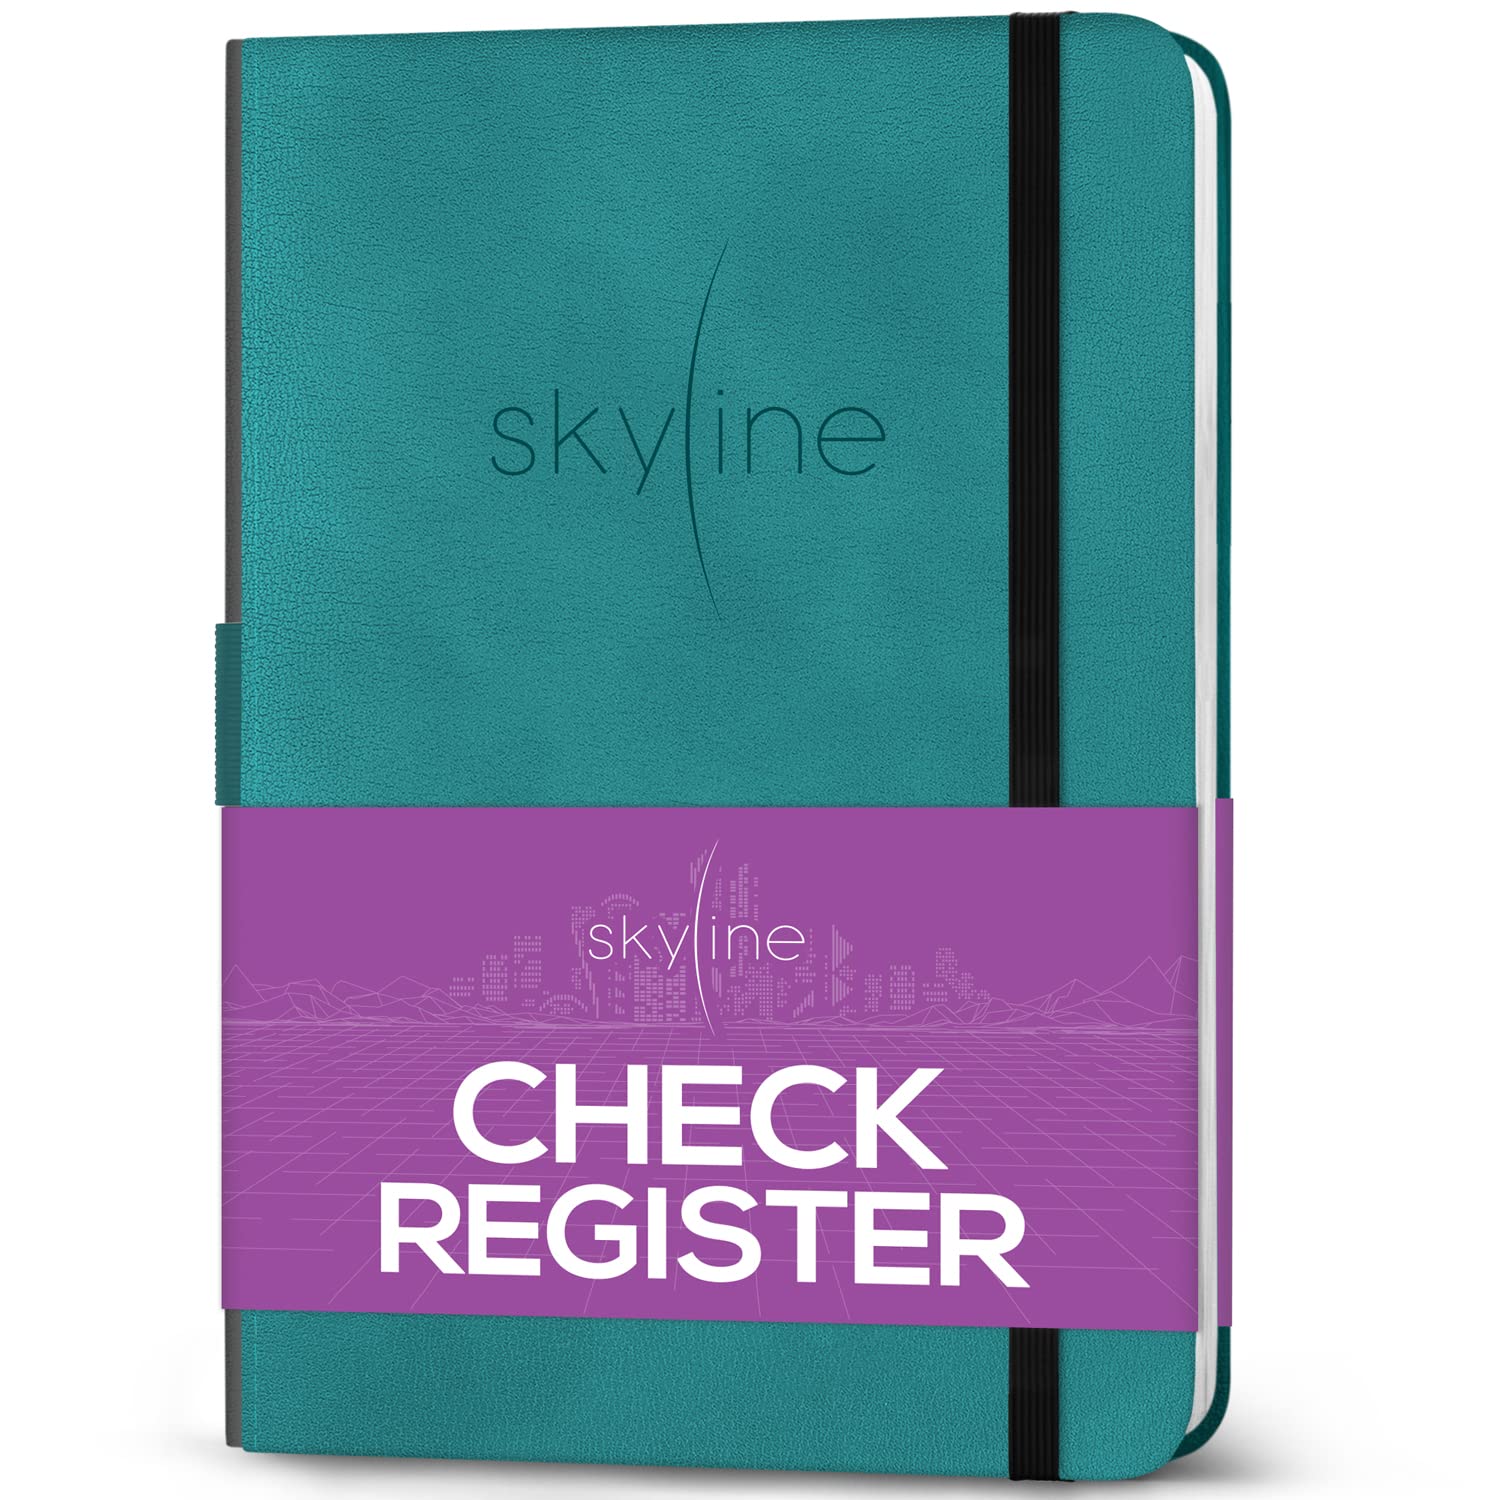 Skyline check Register - Accounting Ledger Log Book for Income & Expenses - Transaction checkbook for Small Business - checking 